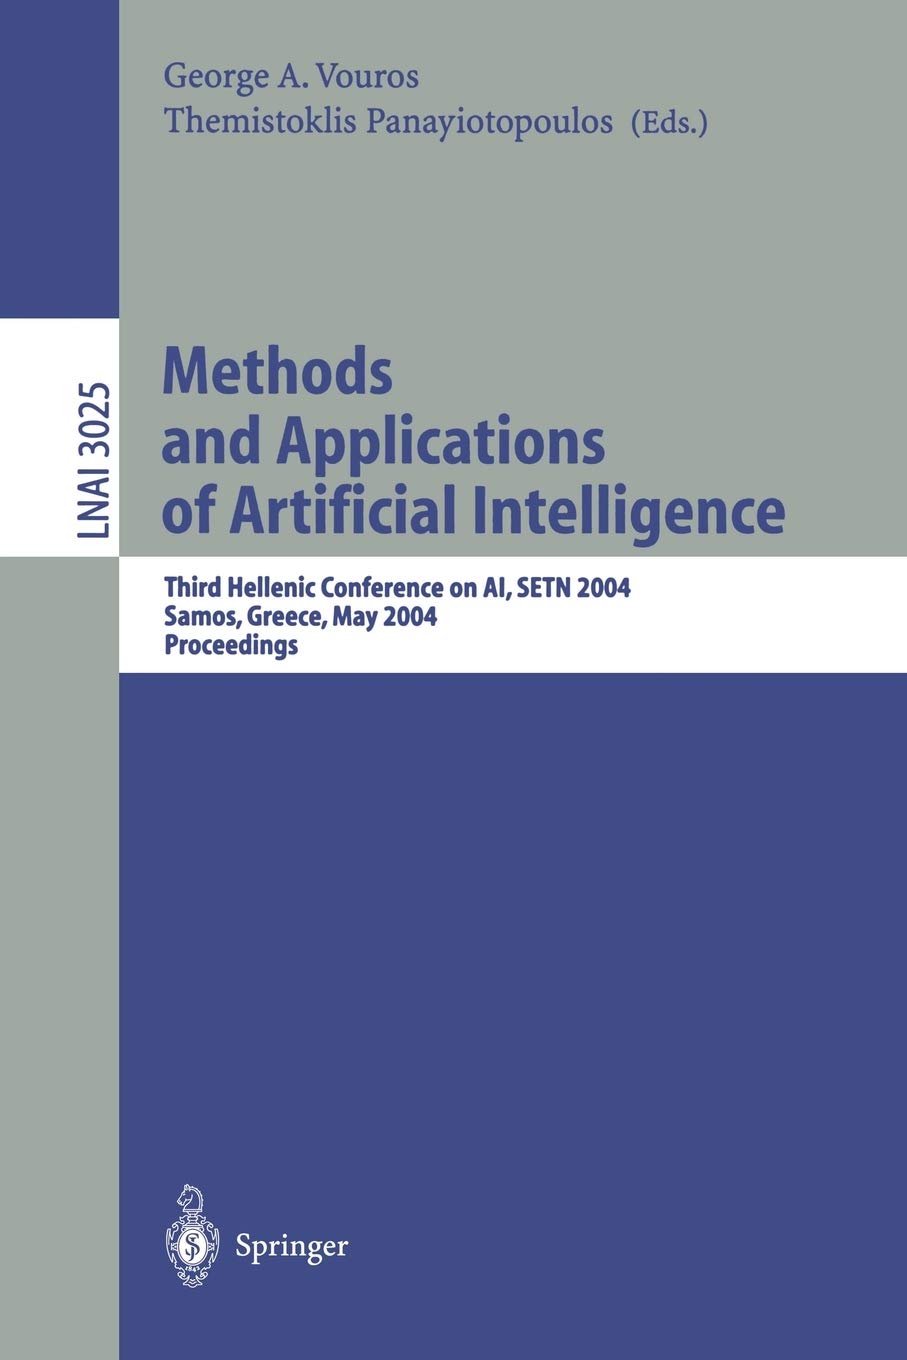 Methods and Applications of Artificial Intelligence: Third Helenic Conference on AI, SETN 2004, Samos, Greece, May 5-8, 2004, Proceedings